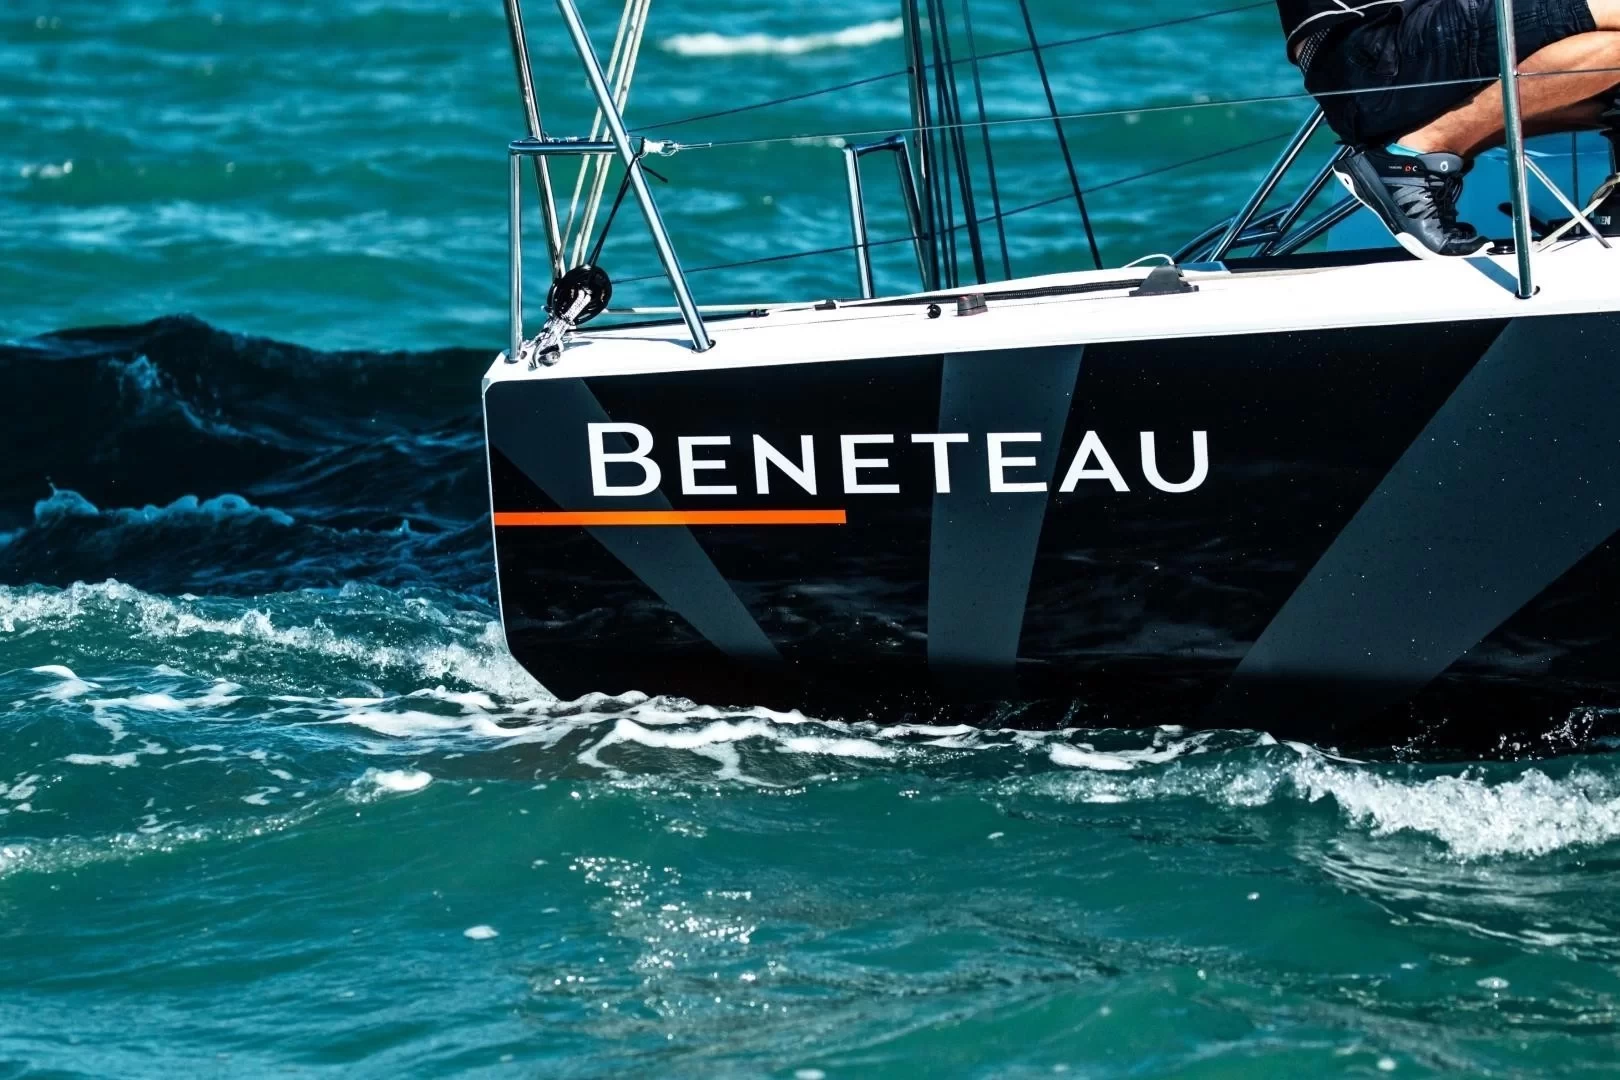 Groupe Beneteau, 2021 earnings: strong growth in revenues